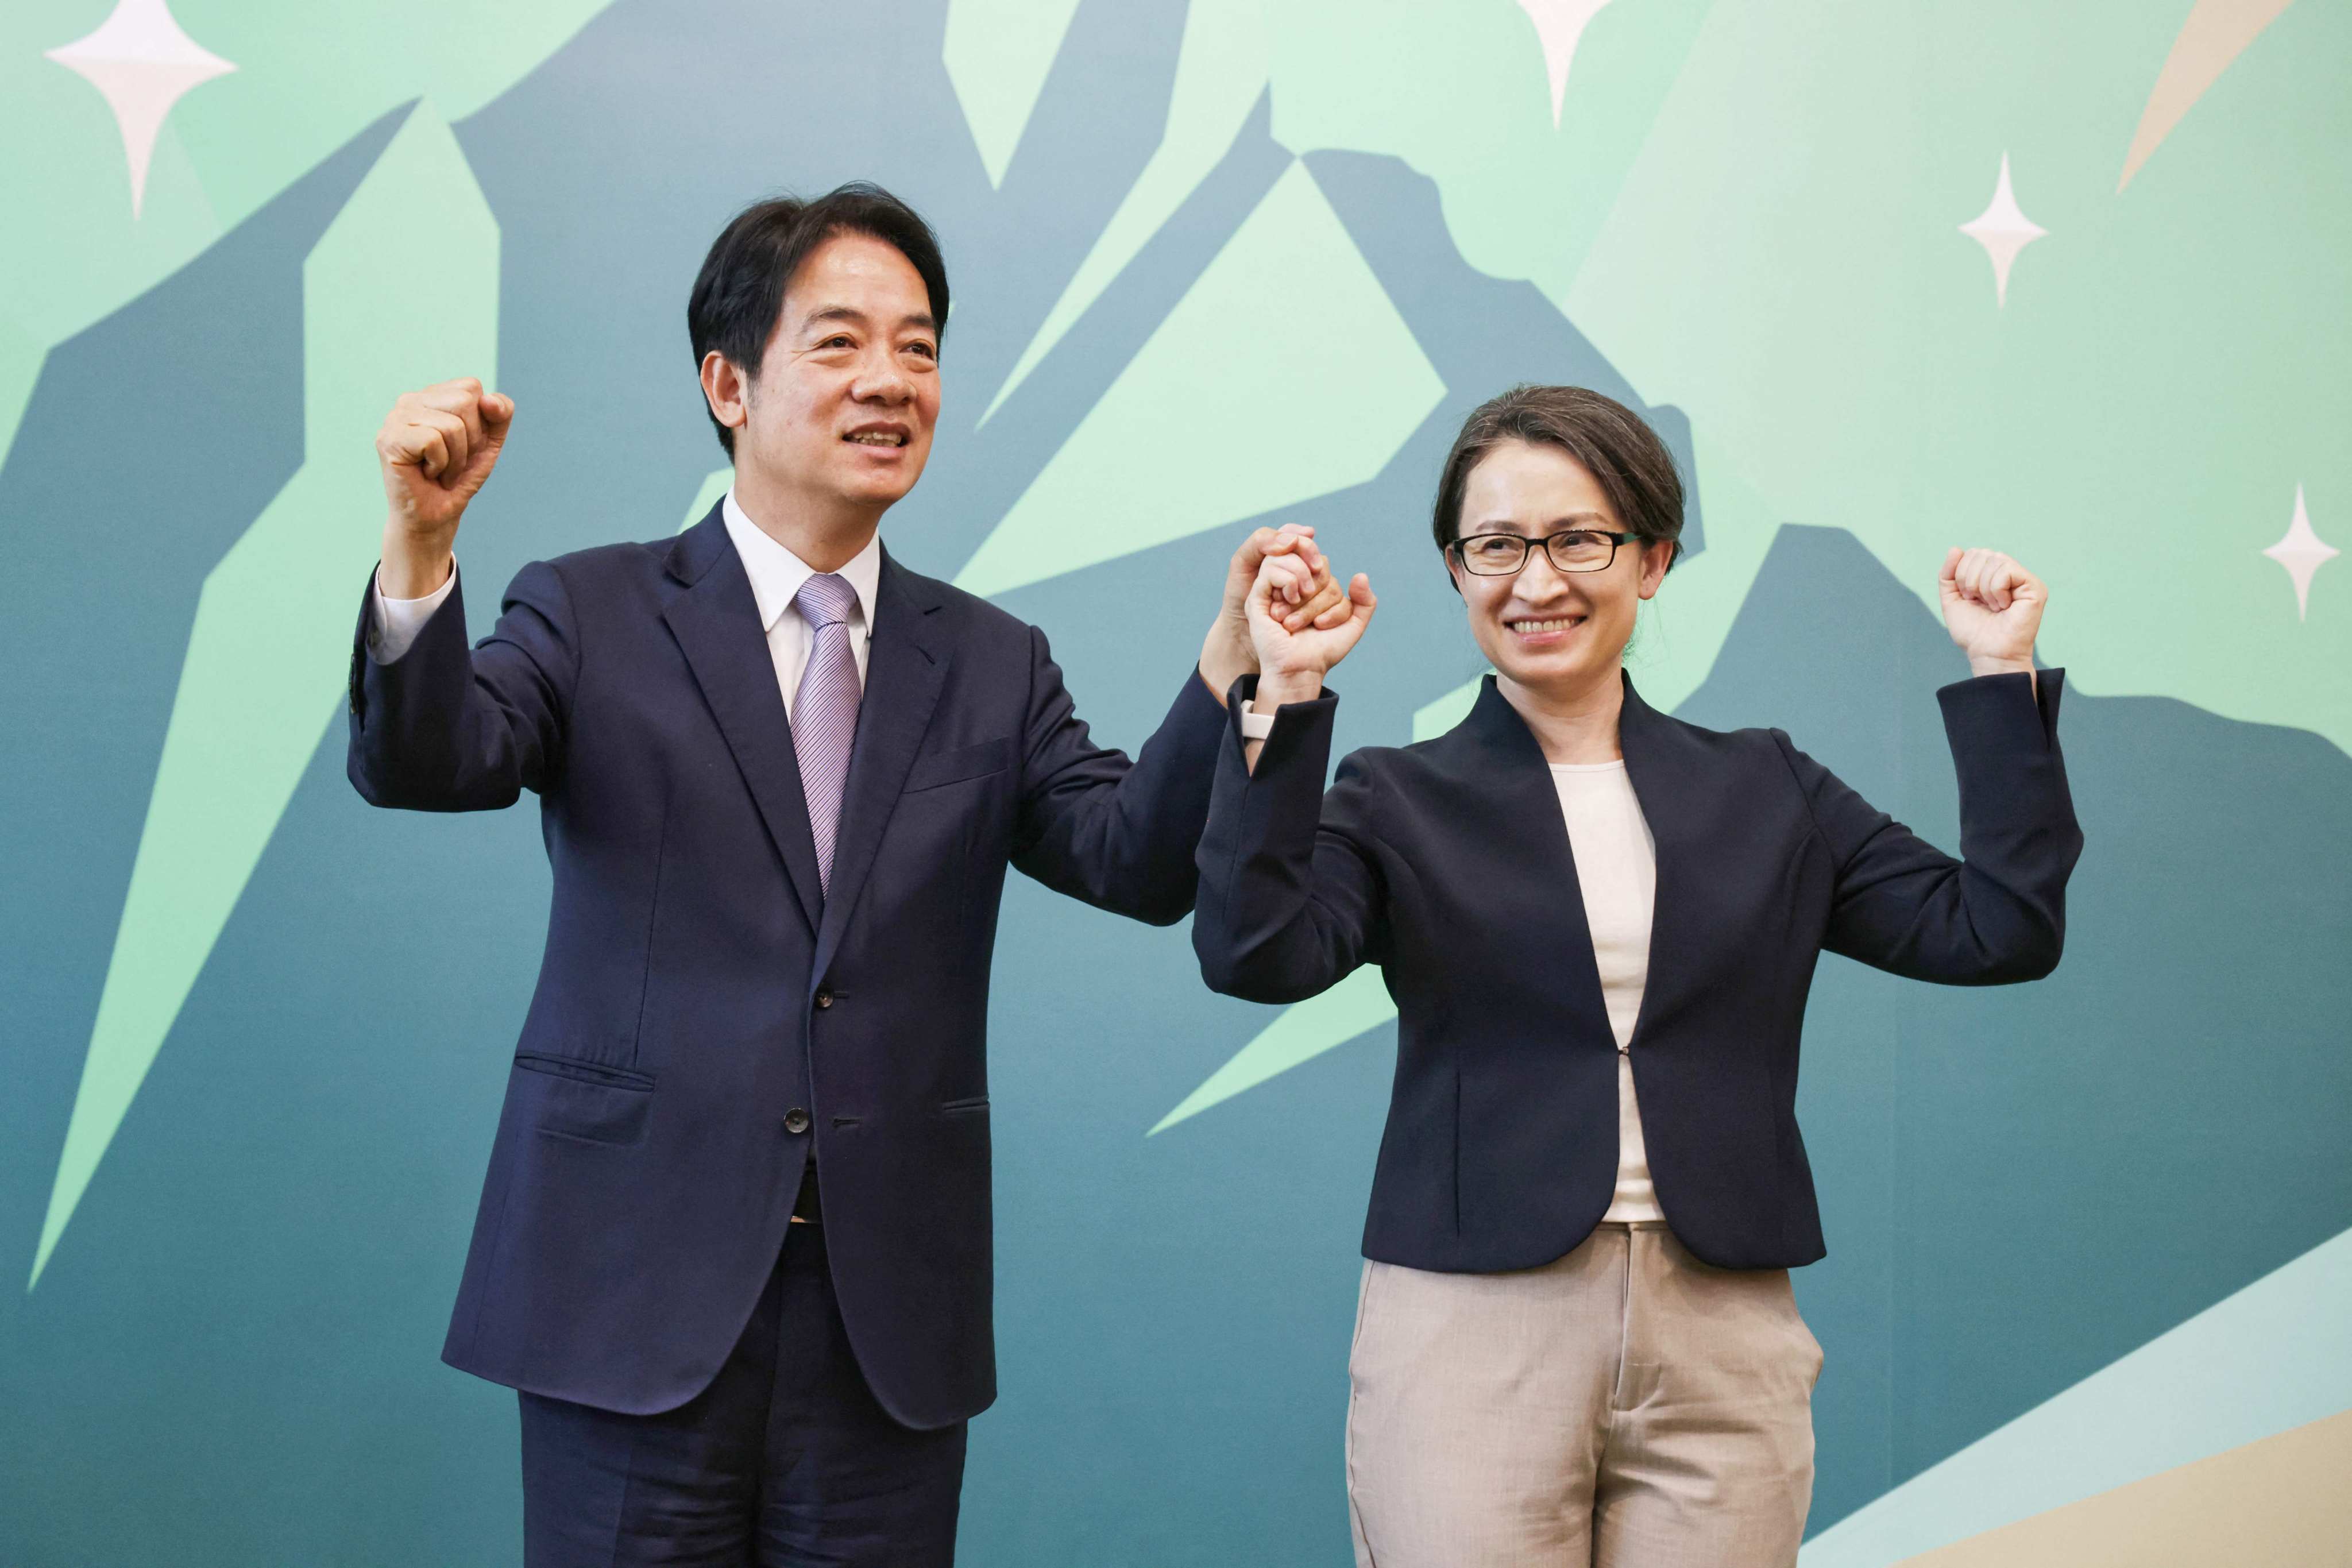 Perfect match or union of pro-independence separatists? The ticket of Lai Ching-te, left, a Taiwanese presidential candidate from the Democratic Progressive Party, and his vice-presidential running mate Hsiao Bi-khim was announced on November 20. Photo: AFP